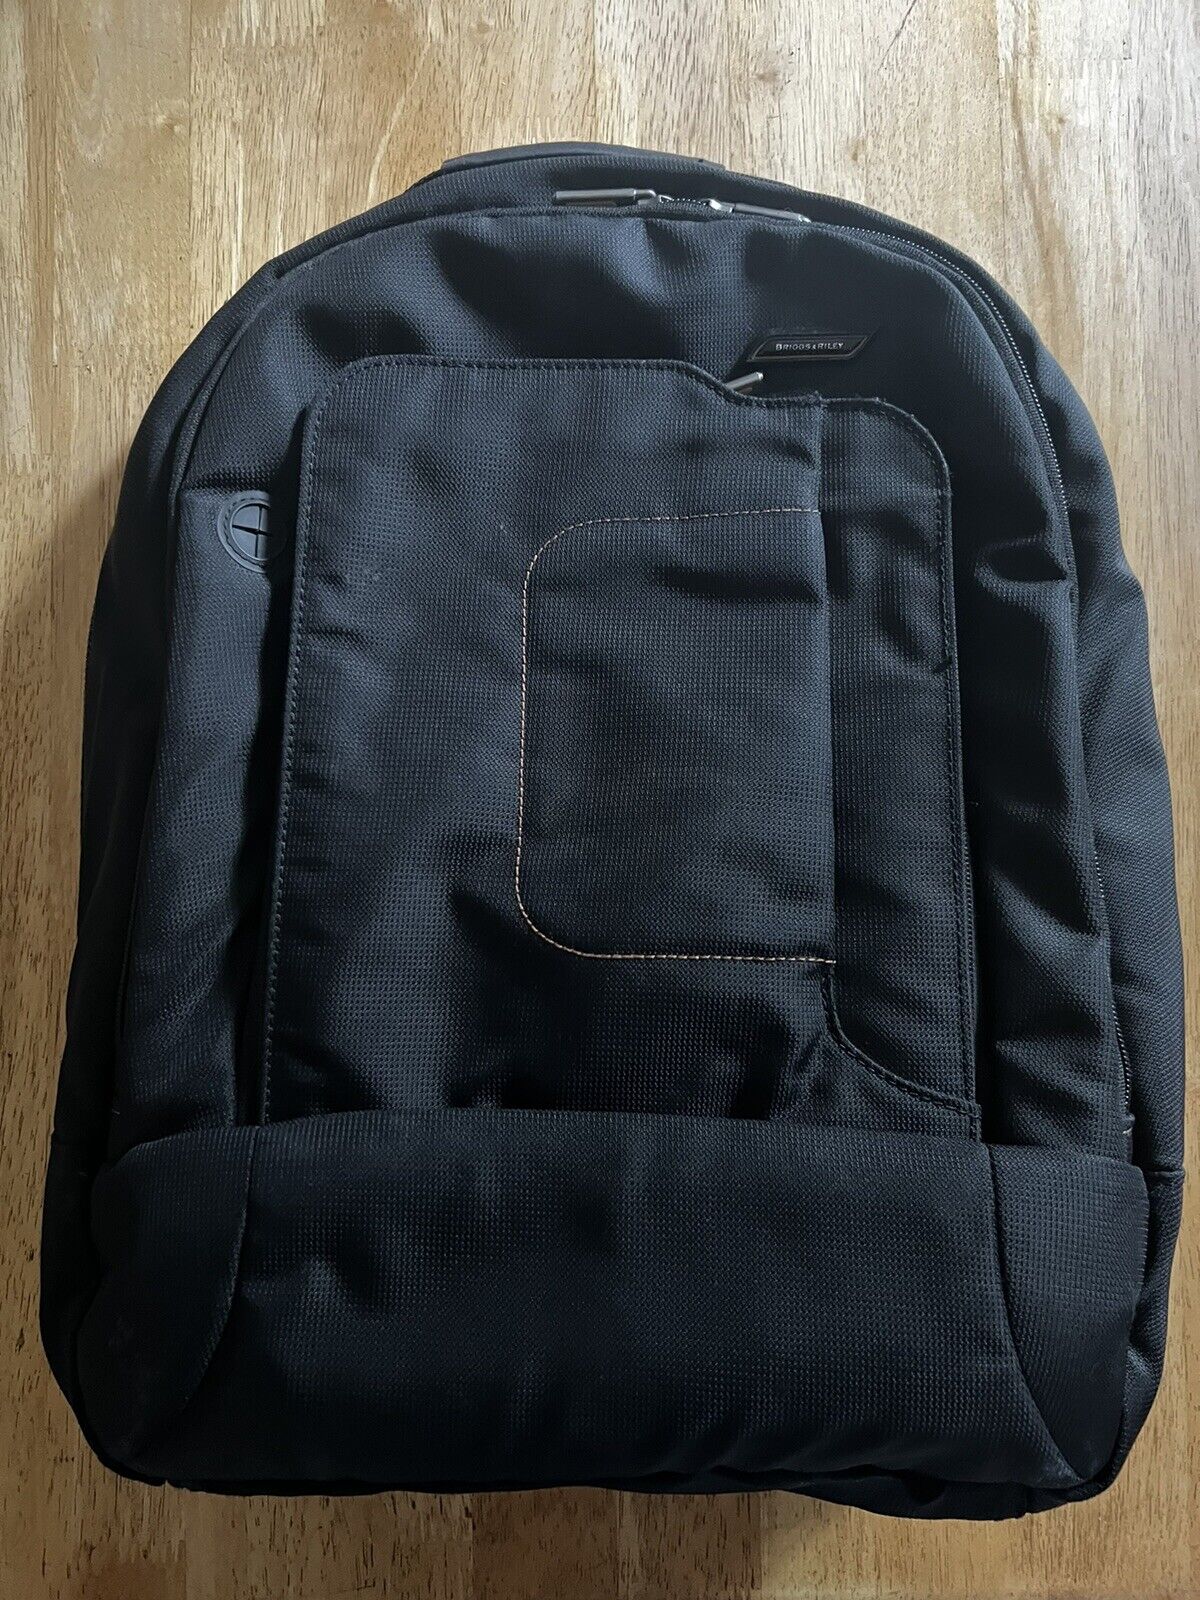 briggs and riley laptop backpack